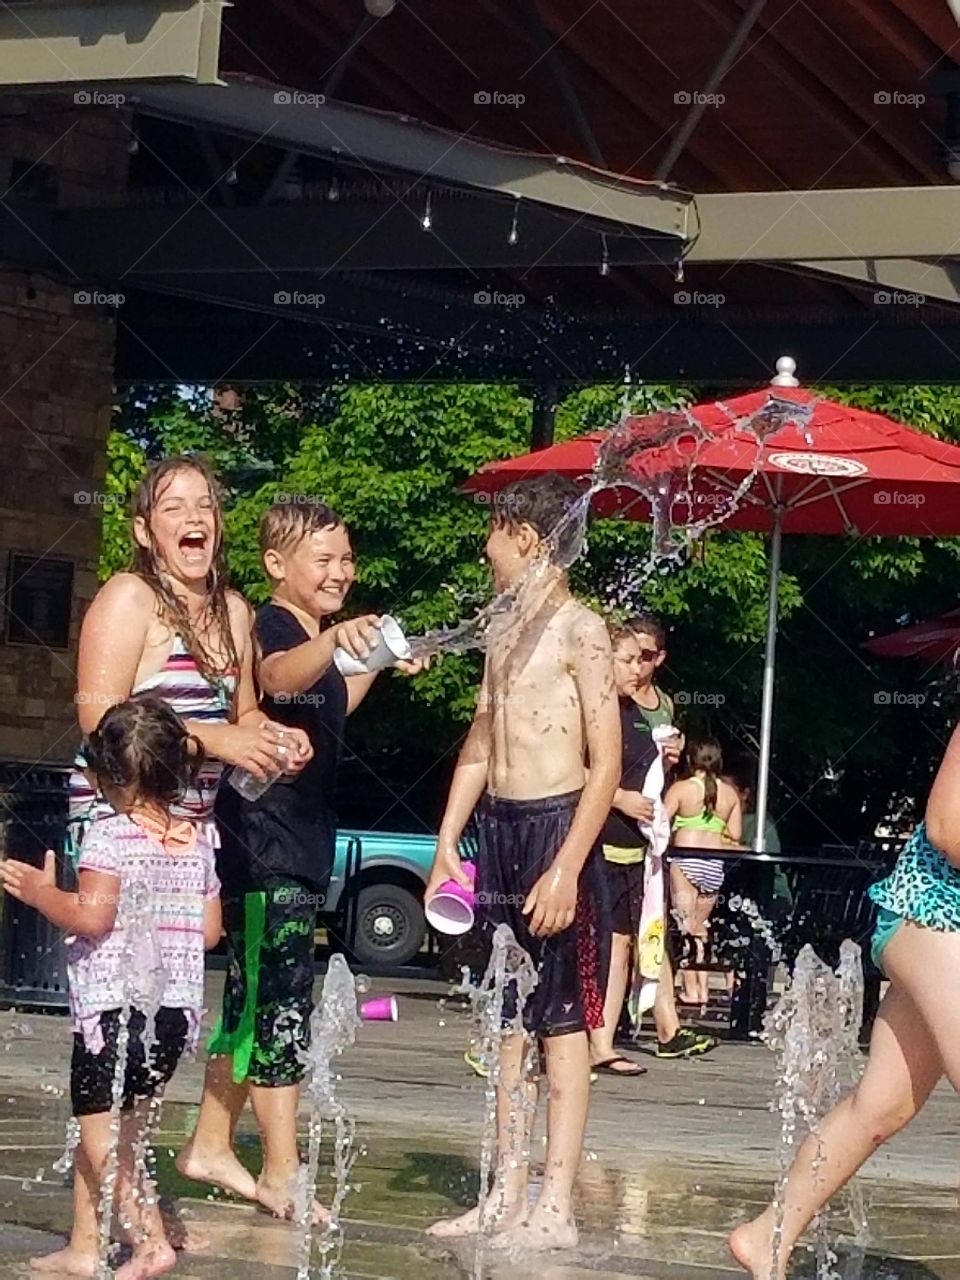 hot day. took the kids to the local fountain/water park. great way to cool off, enjoy the weather, soak up the sun, and watch the kiddos make new friends